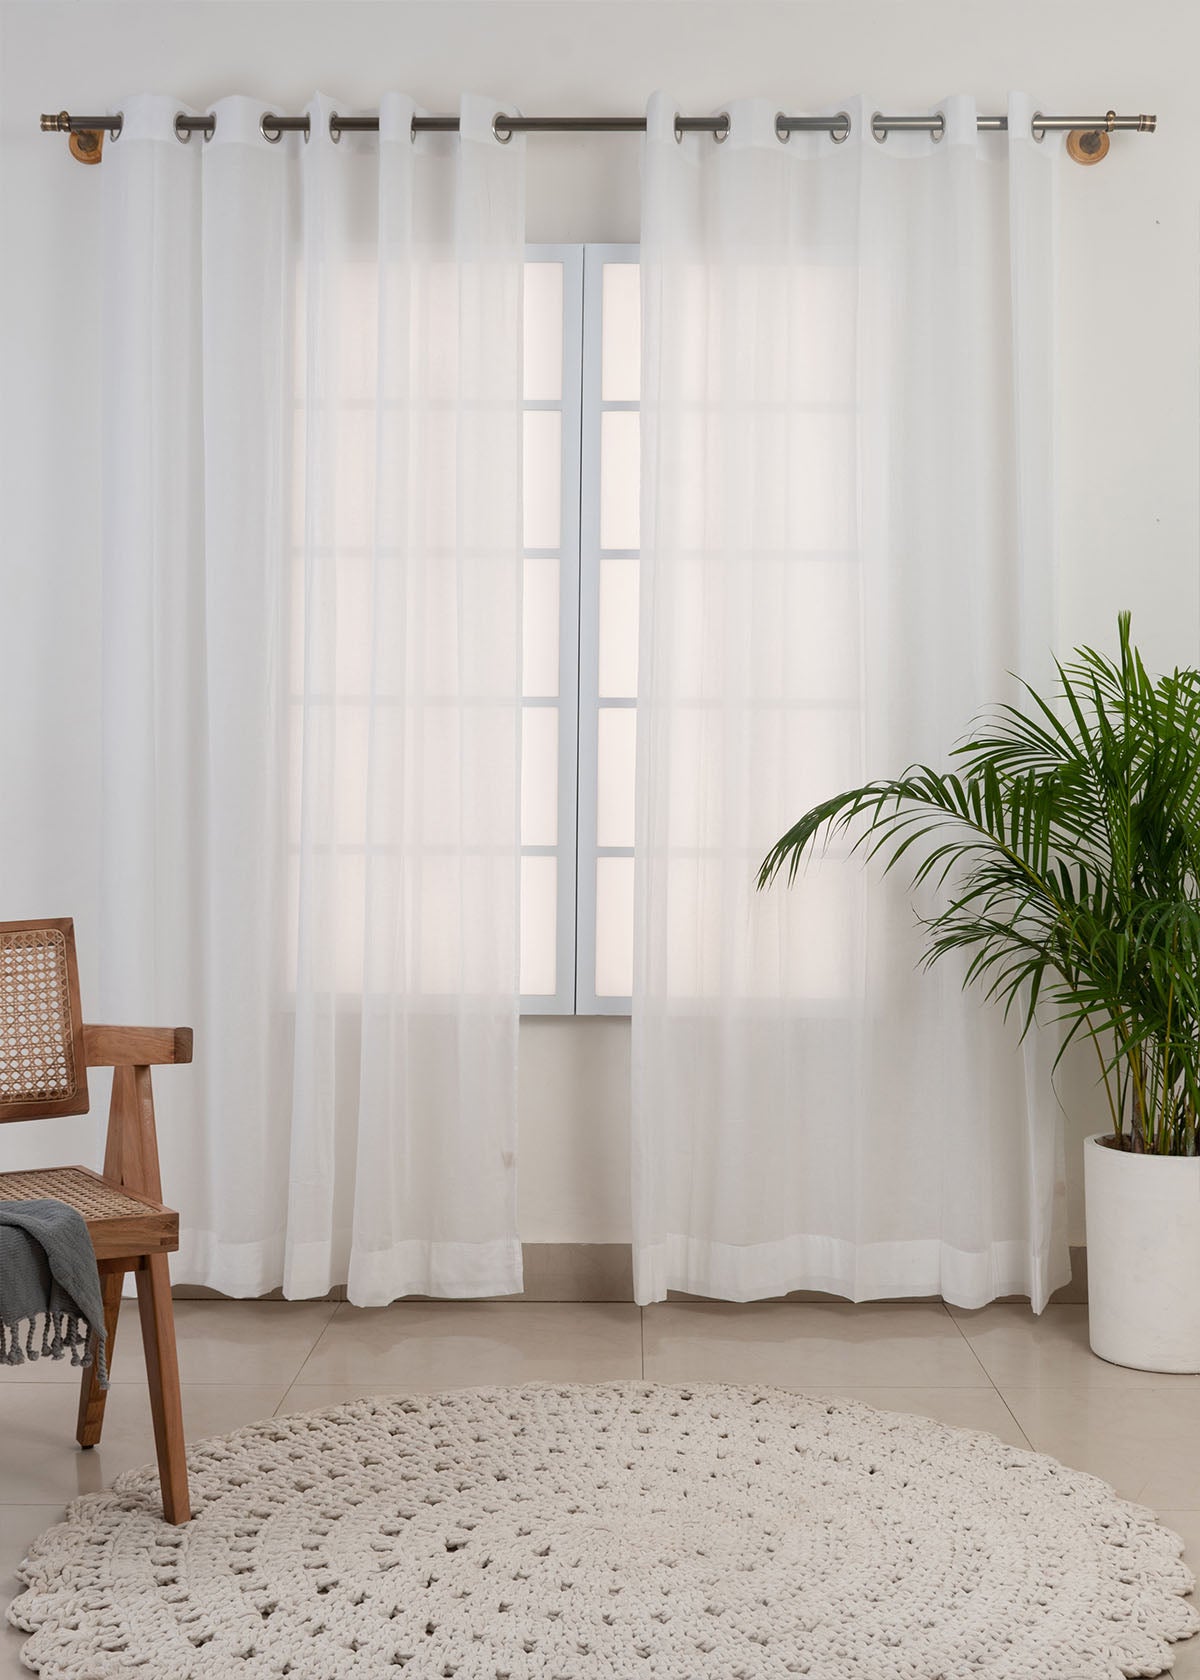 Solid white 100% Customizable Cotton sheer plain curtain for bedroom - Room darkening